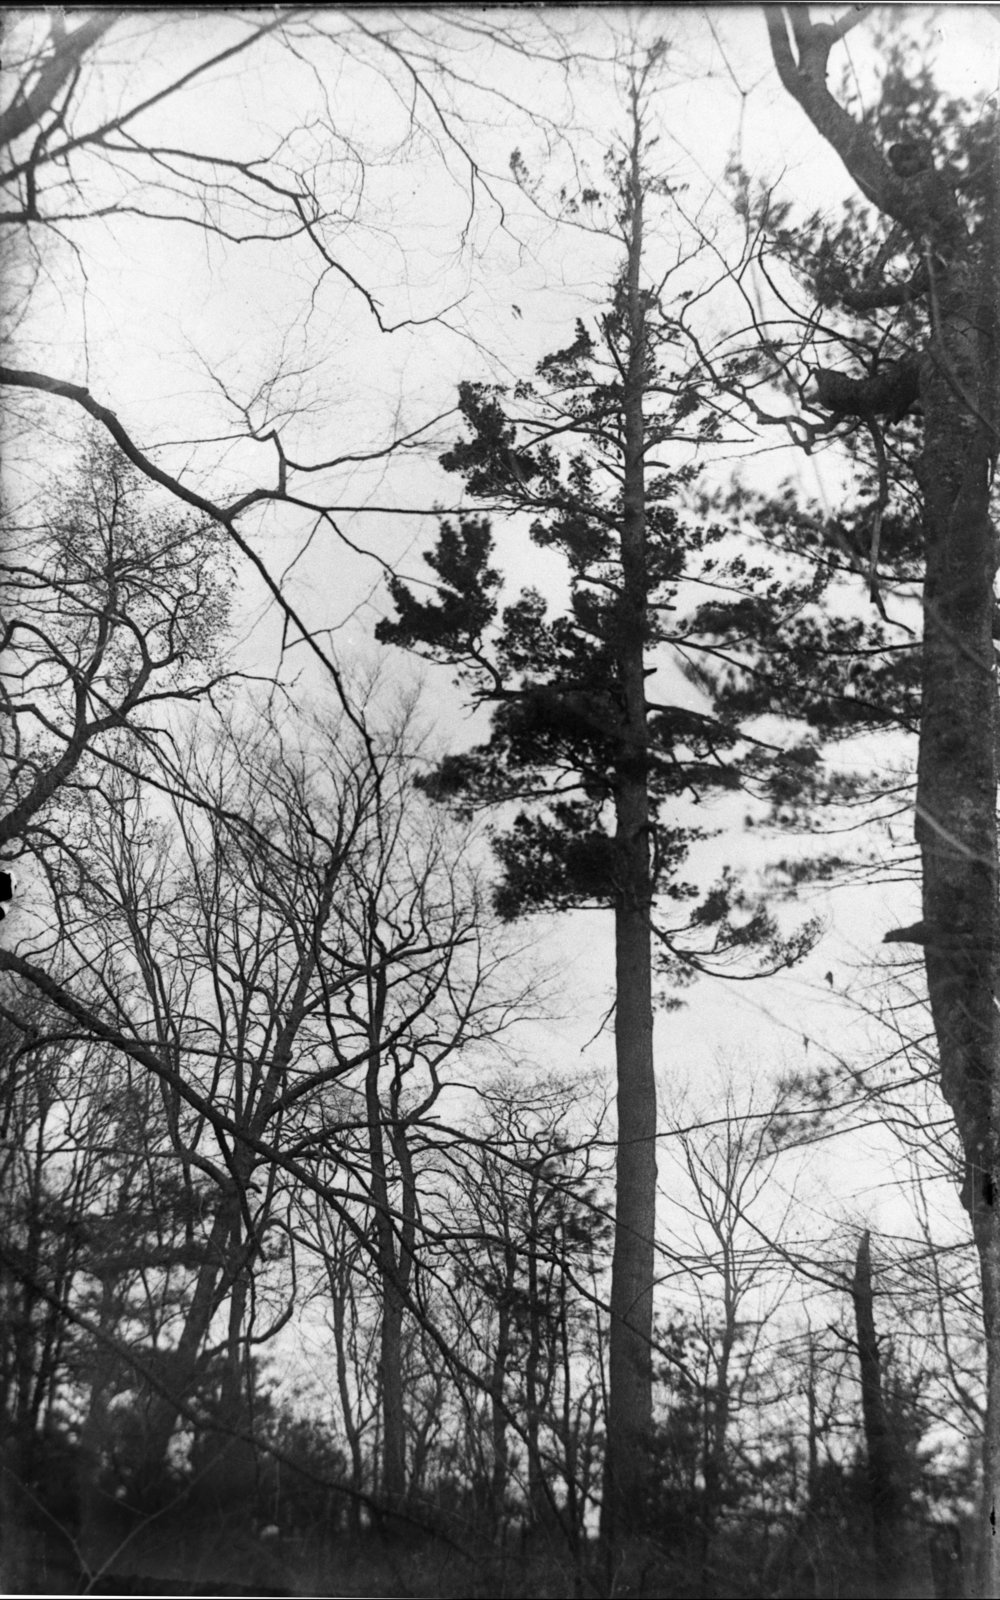 An old photograph of local white pine trees